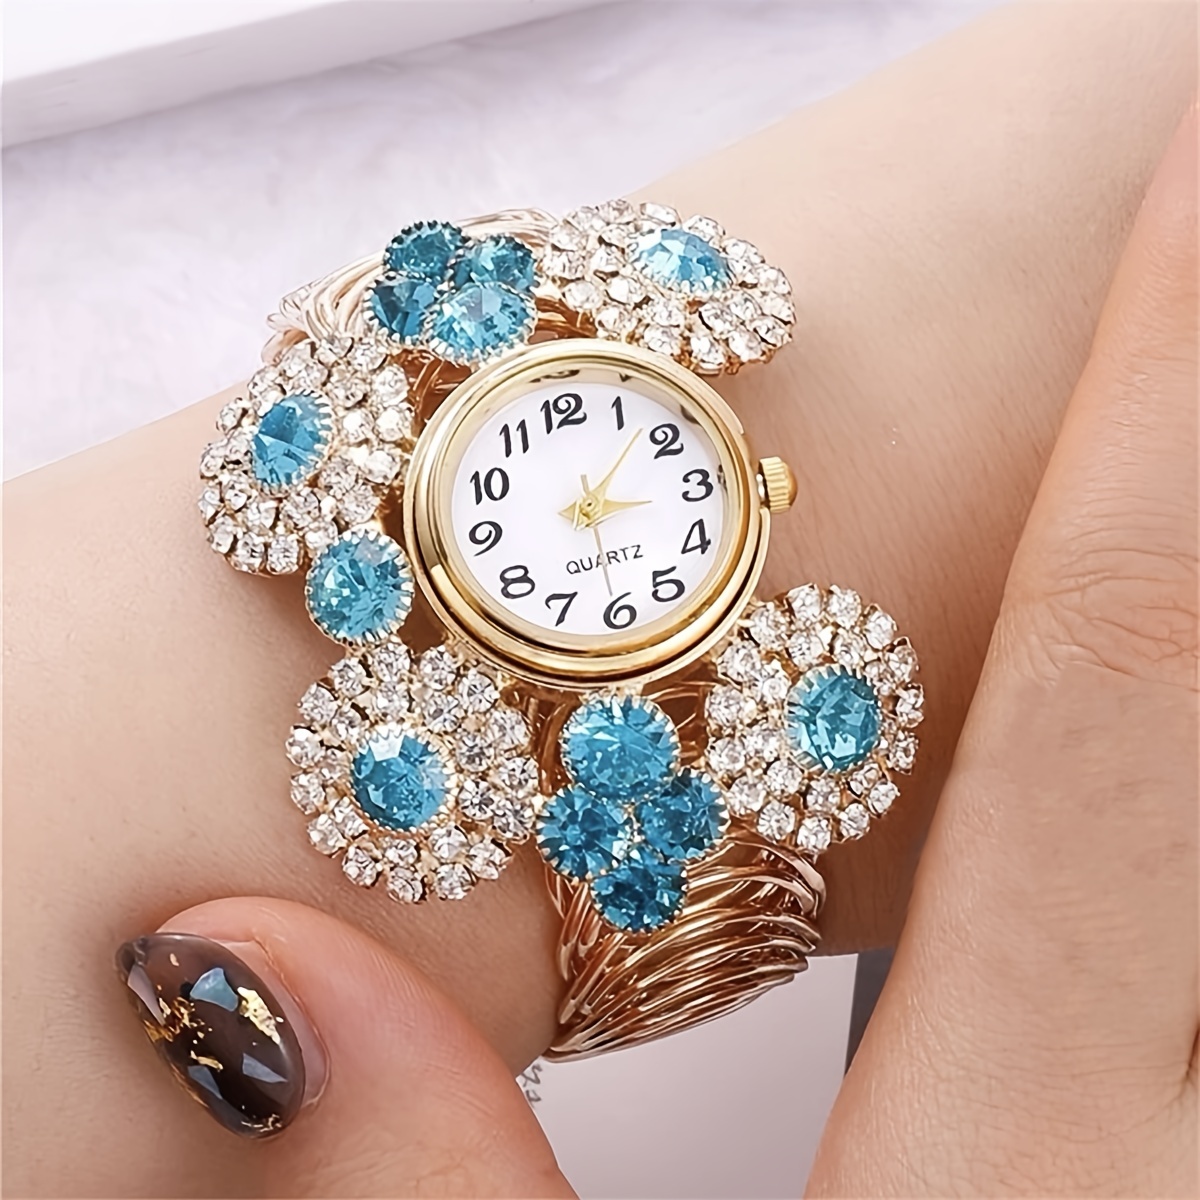 luxury watches and jewelry